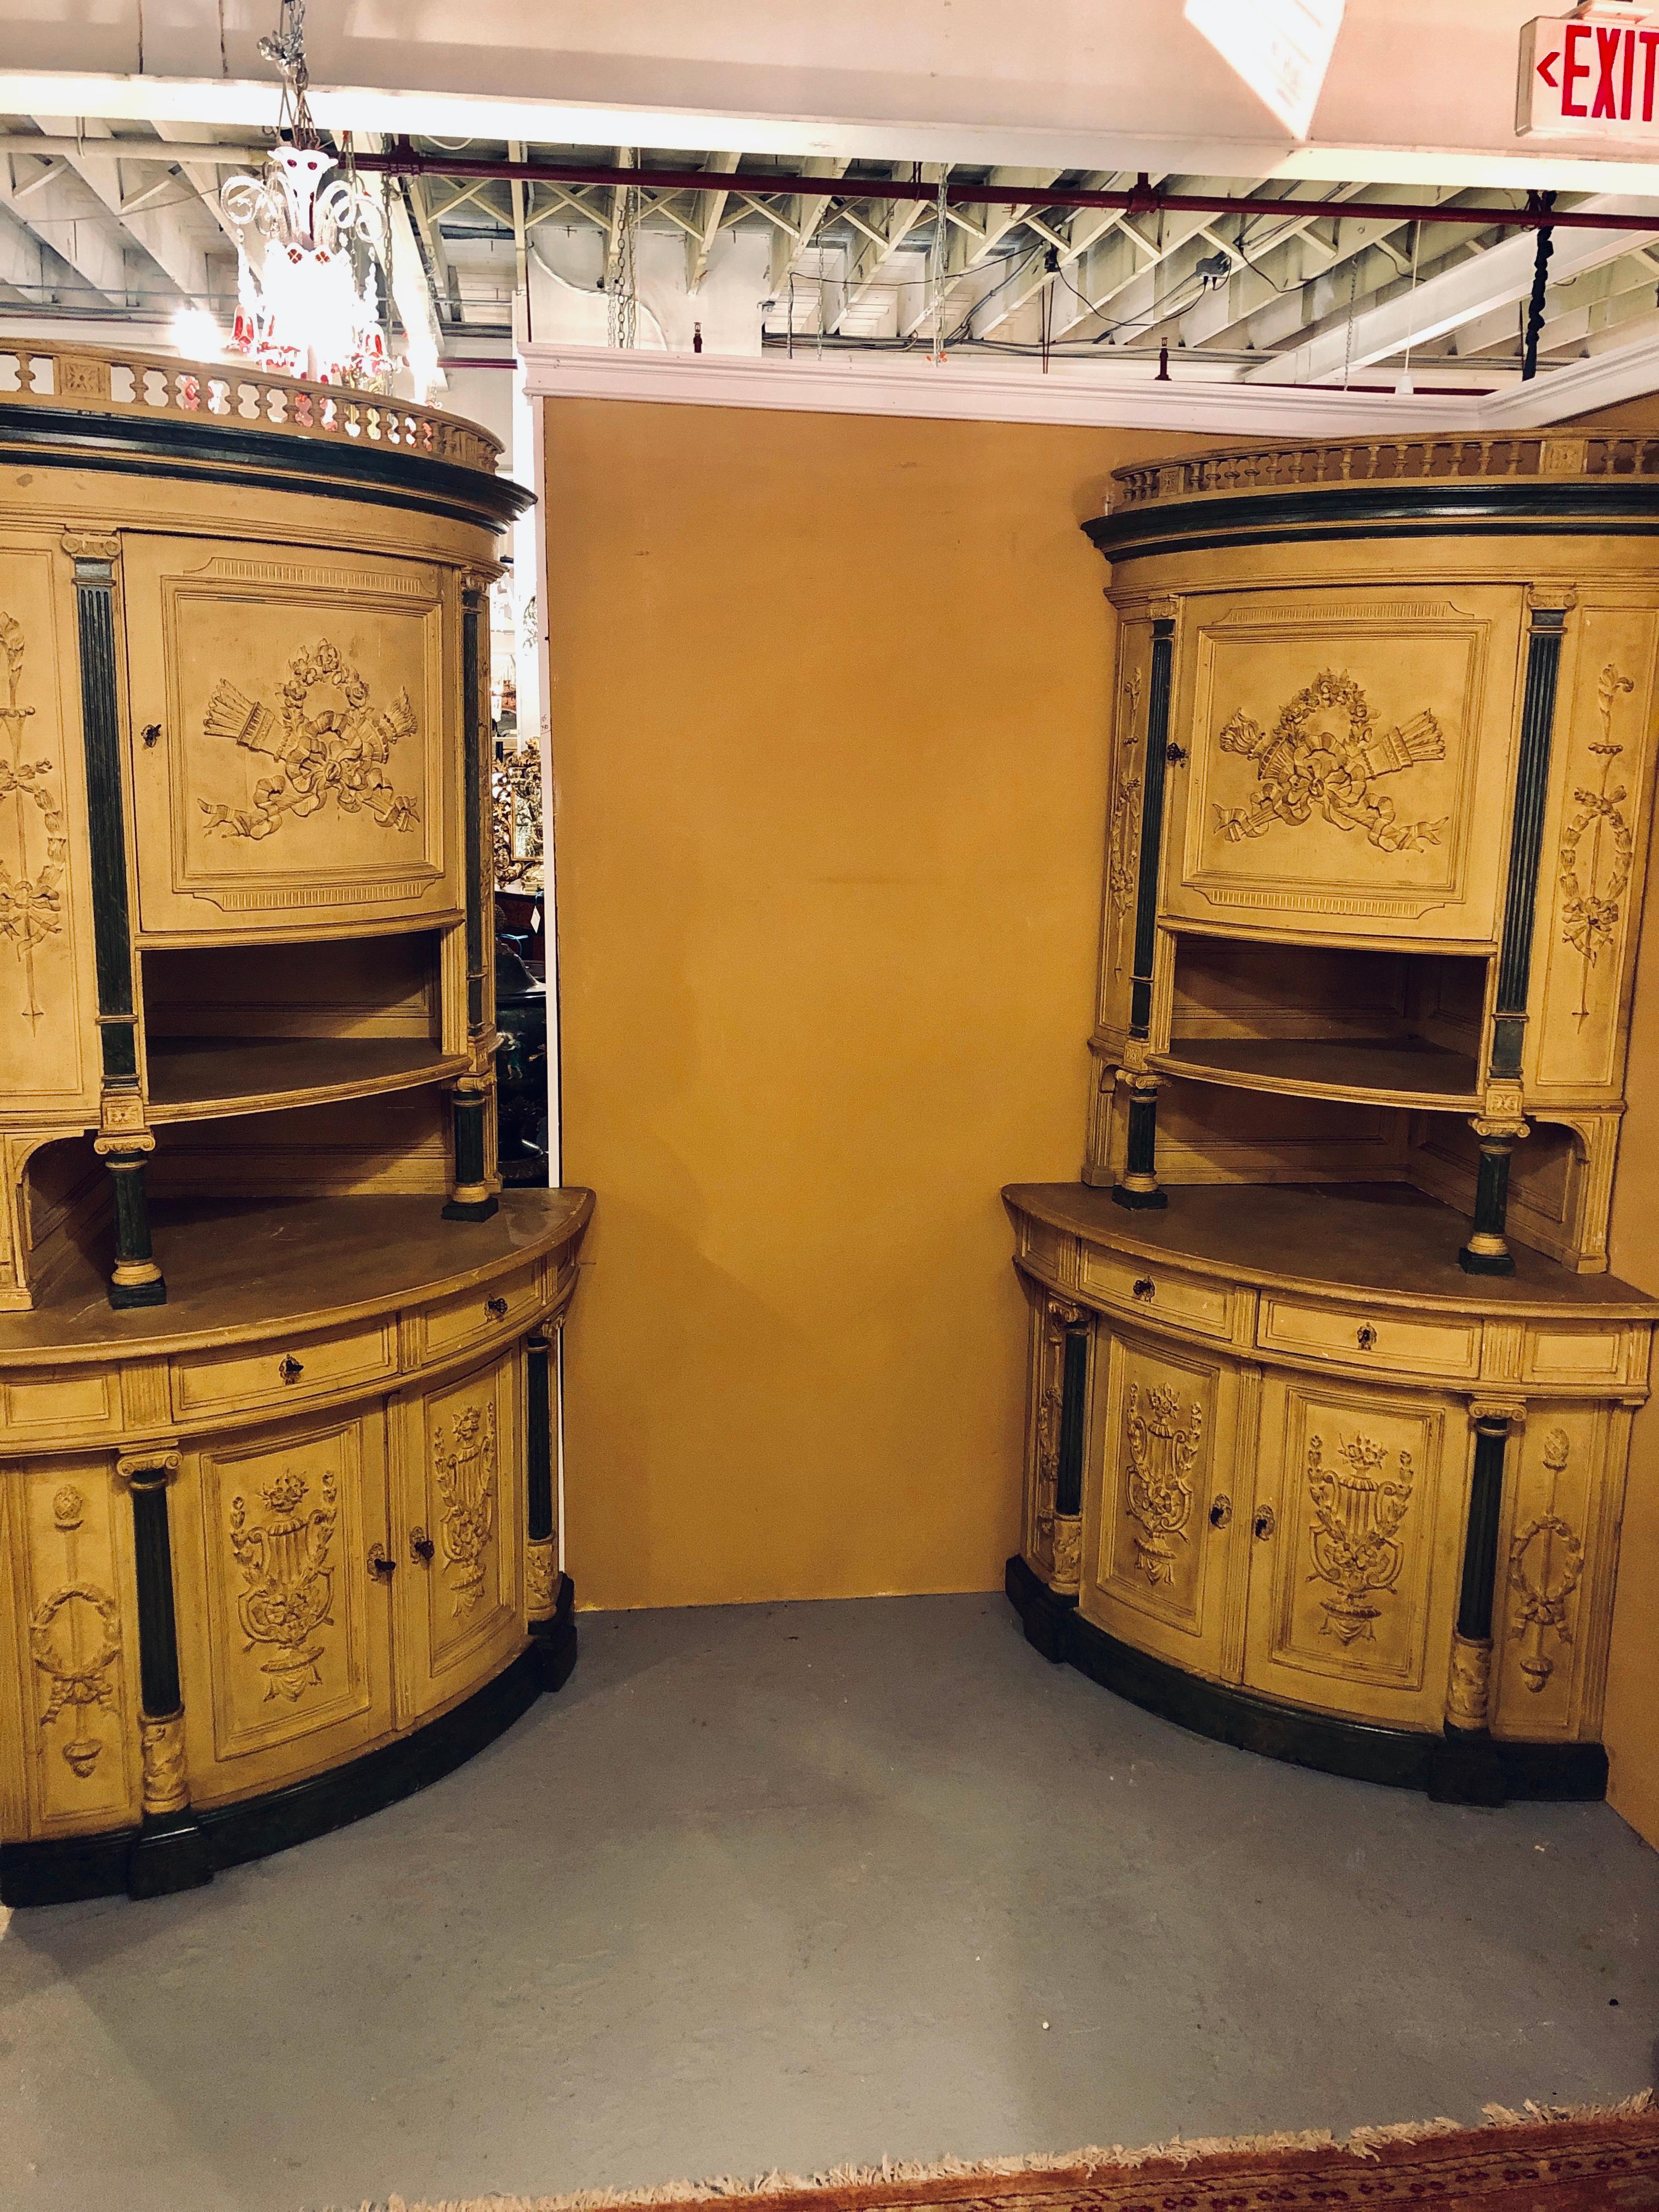 Pair of 19th century monumental Louis XVI style paint decorated corner cabinets having faux marble columns. These are simply breathtaking and certainly will never be seen again. The fine Louis XVI Style carvings of floral torch and wreath design are